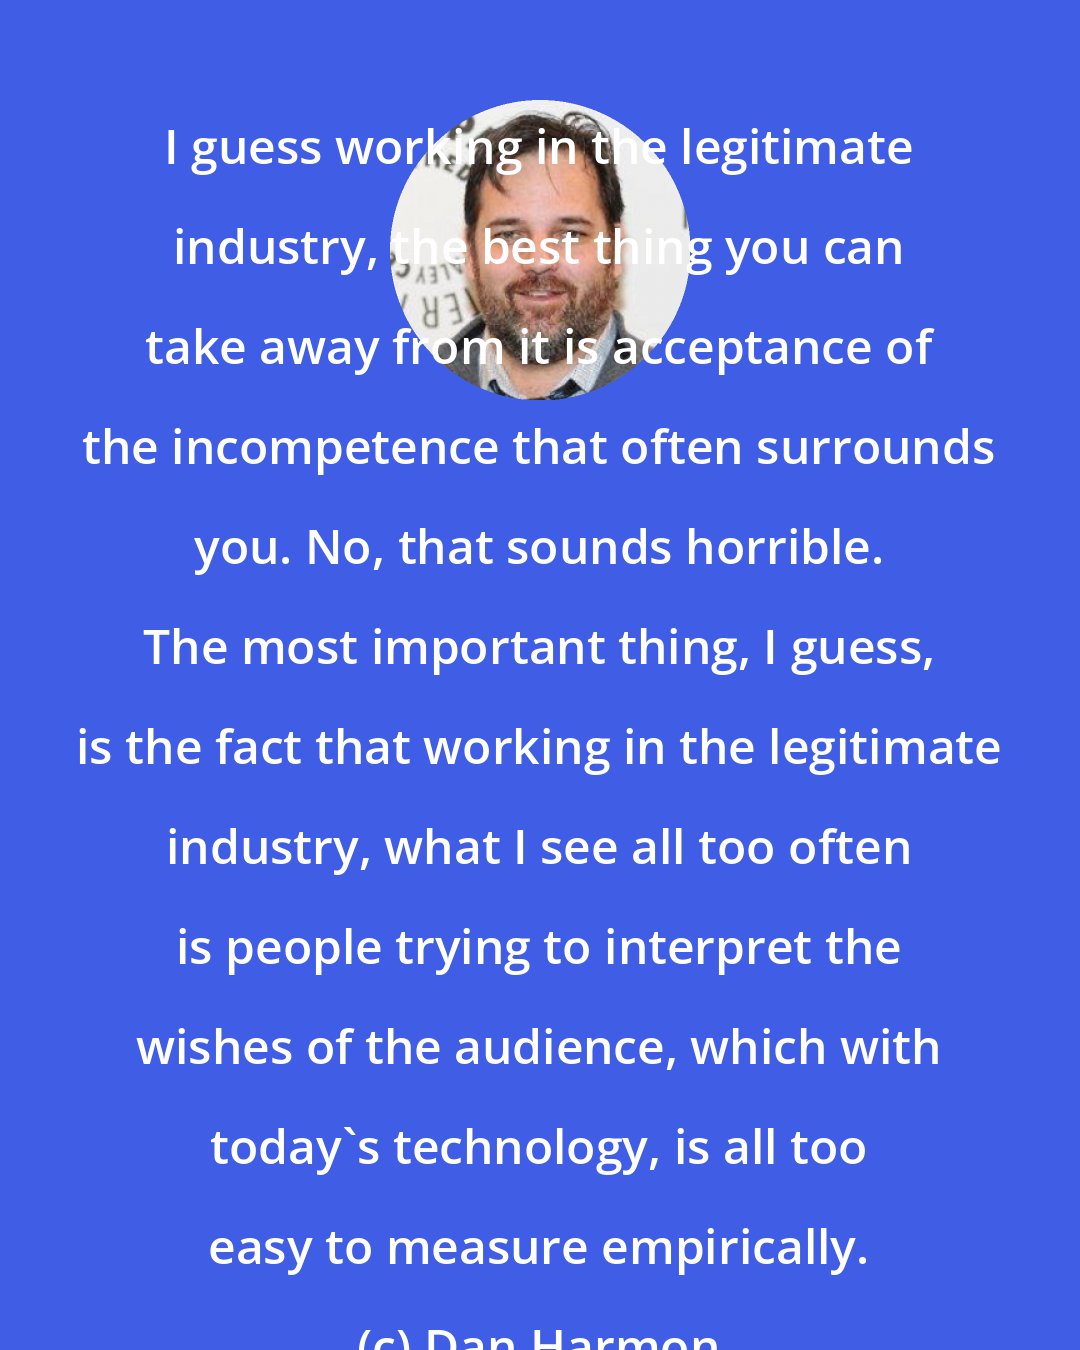 Dan Harmon: I guess working in the legitimate industry, the best thing you can take away from it is acceptance of the incompetence that often surrounds you. No, that sounds horrible. The most important thing, I guess, is the fact that working in the legitimate industry, what I see all too often is people trying to interpret the wishes of the audience, which with today's technology, is all too easy to measure empirically.